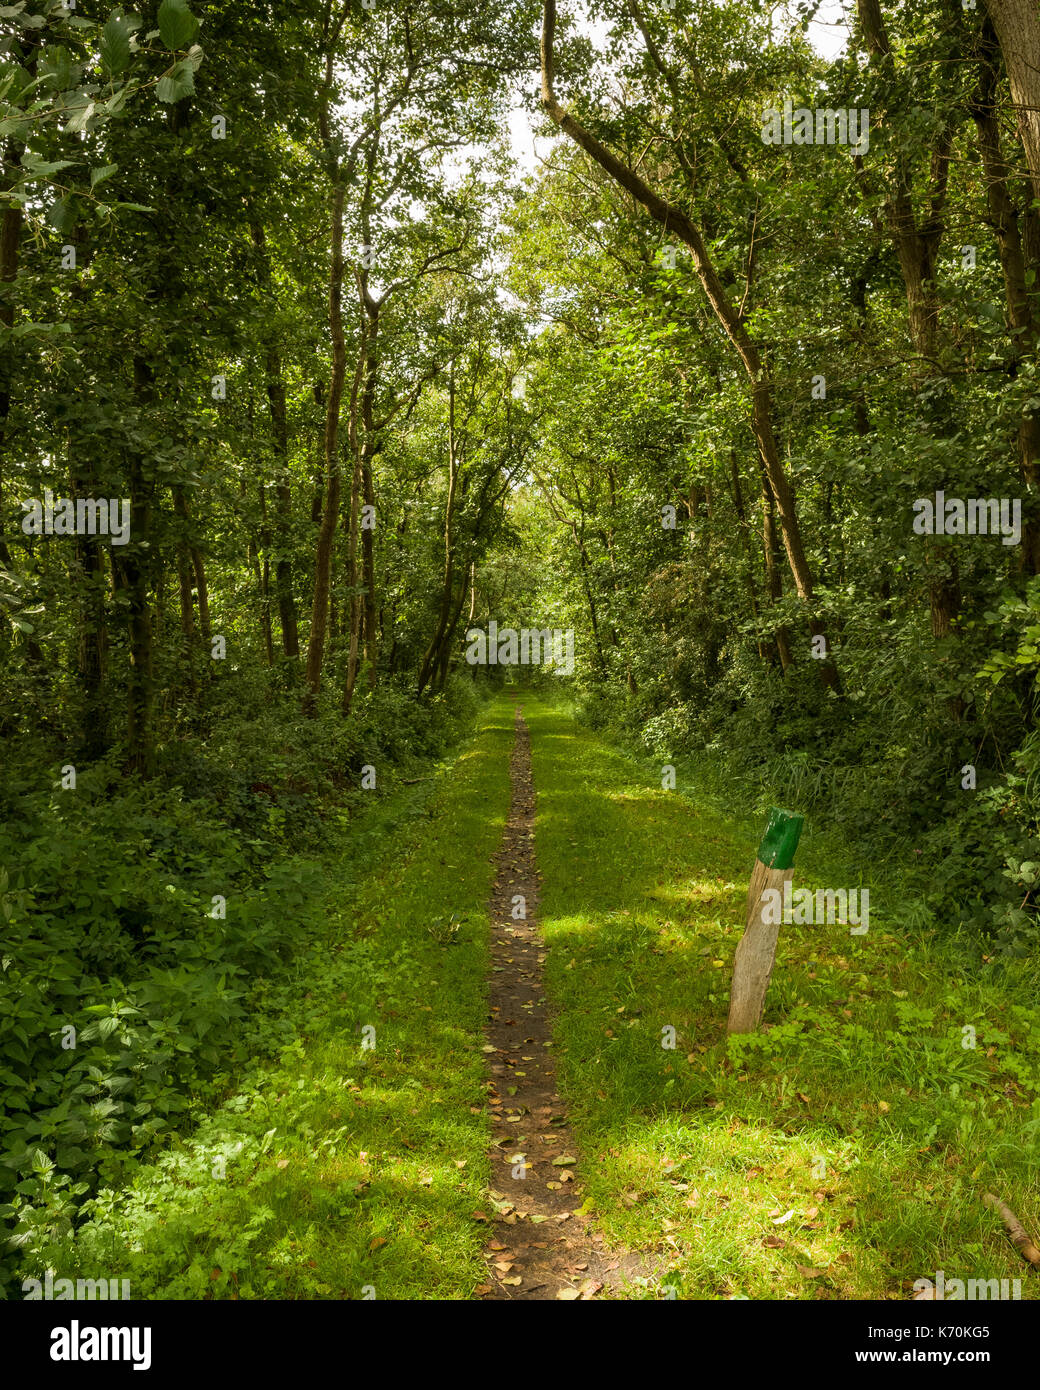 Am Wald, Langeoog.  Deutschland.  Germany.  A view looking down a footpath into the dense woodland.  Dappled sunlight shines through trees on to the ground. Stock Photo